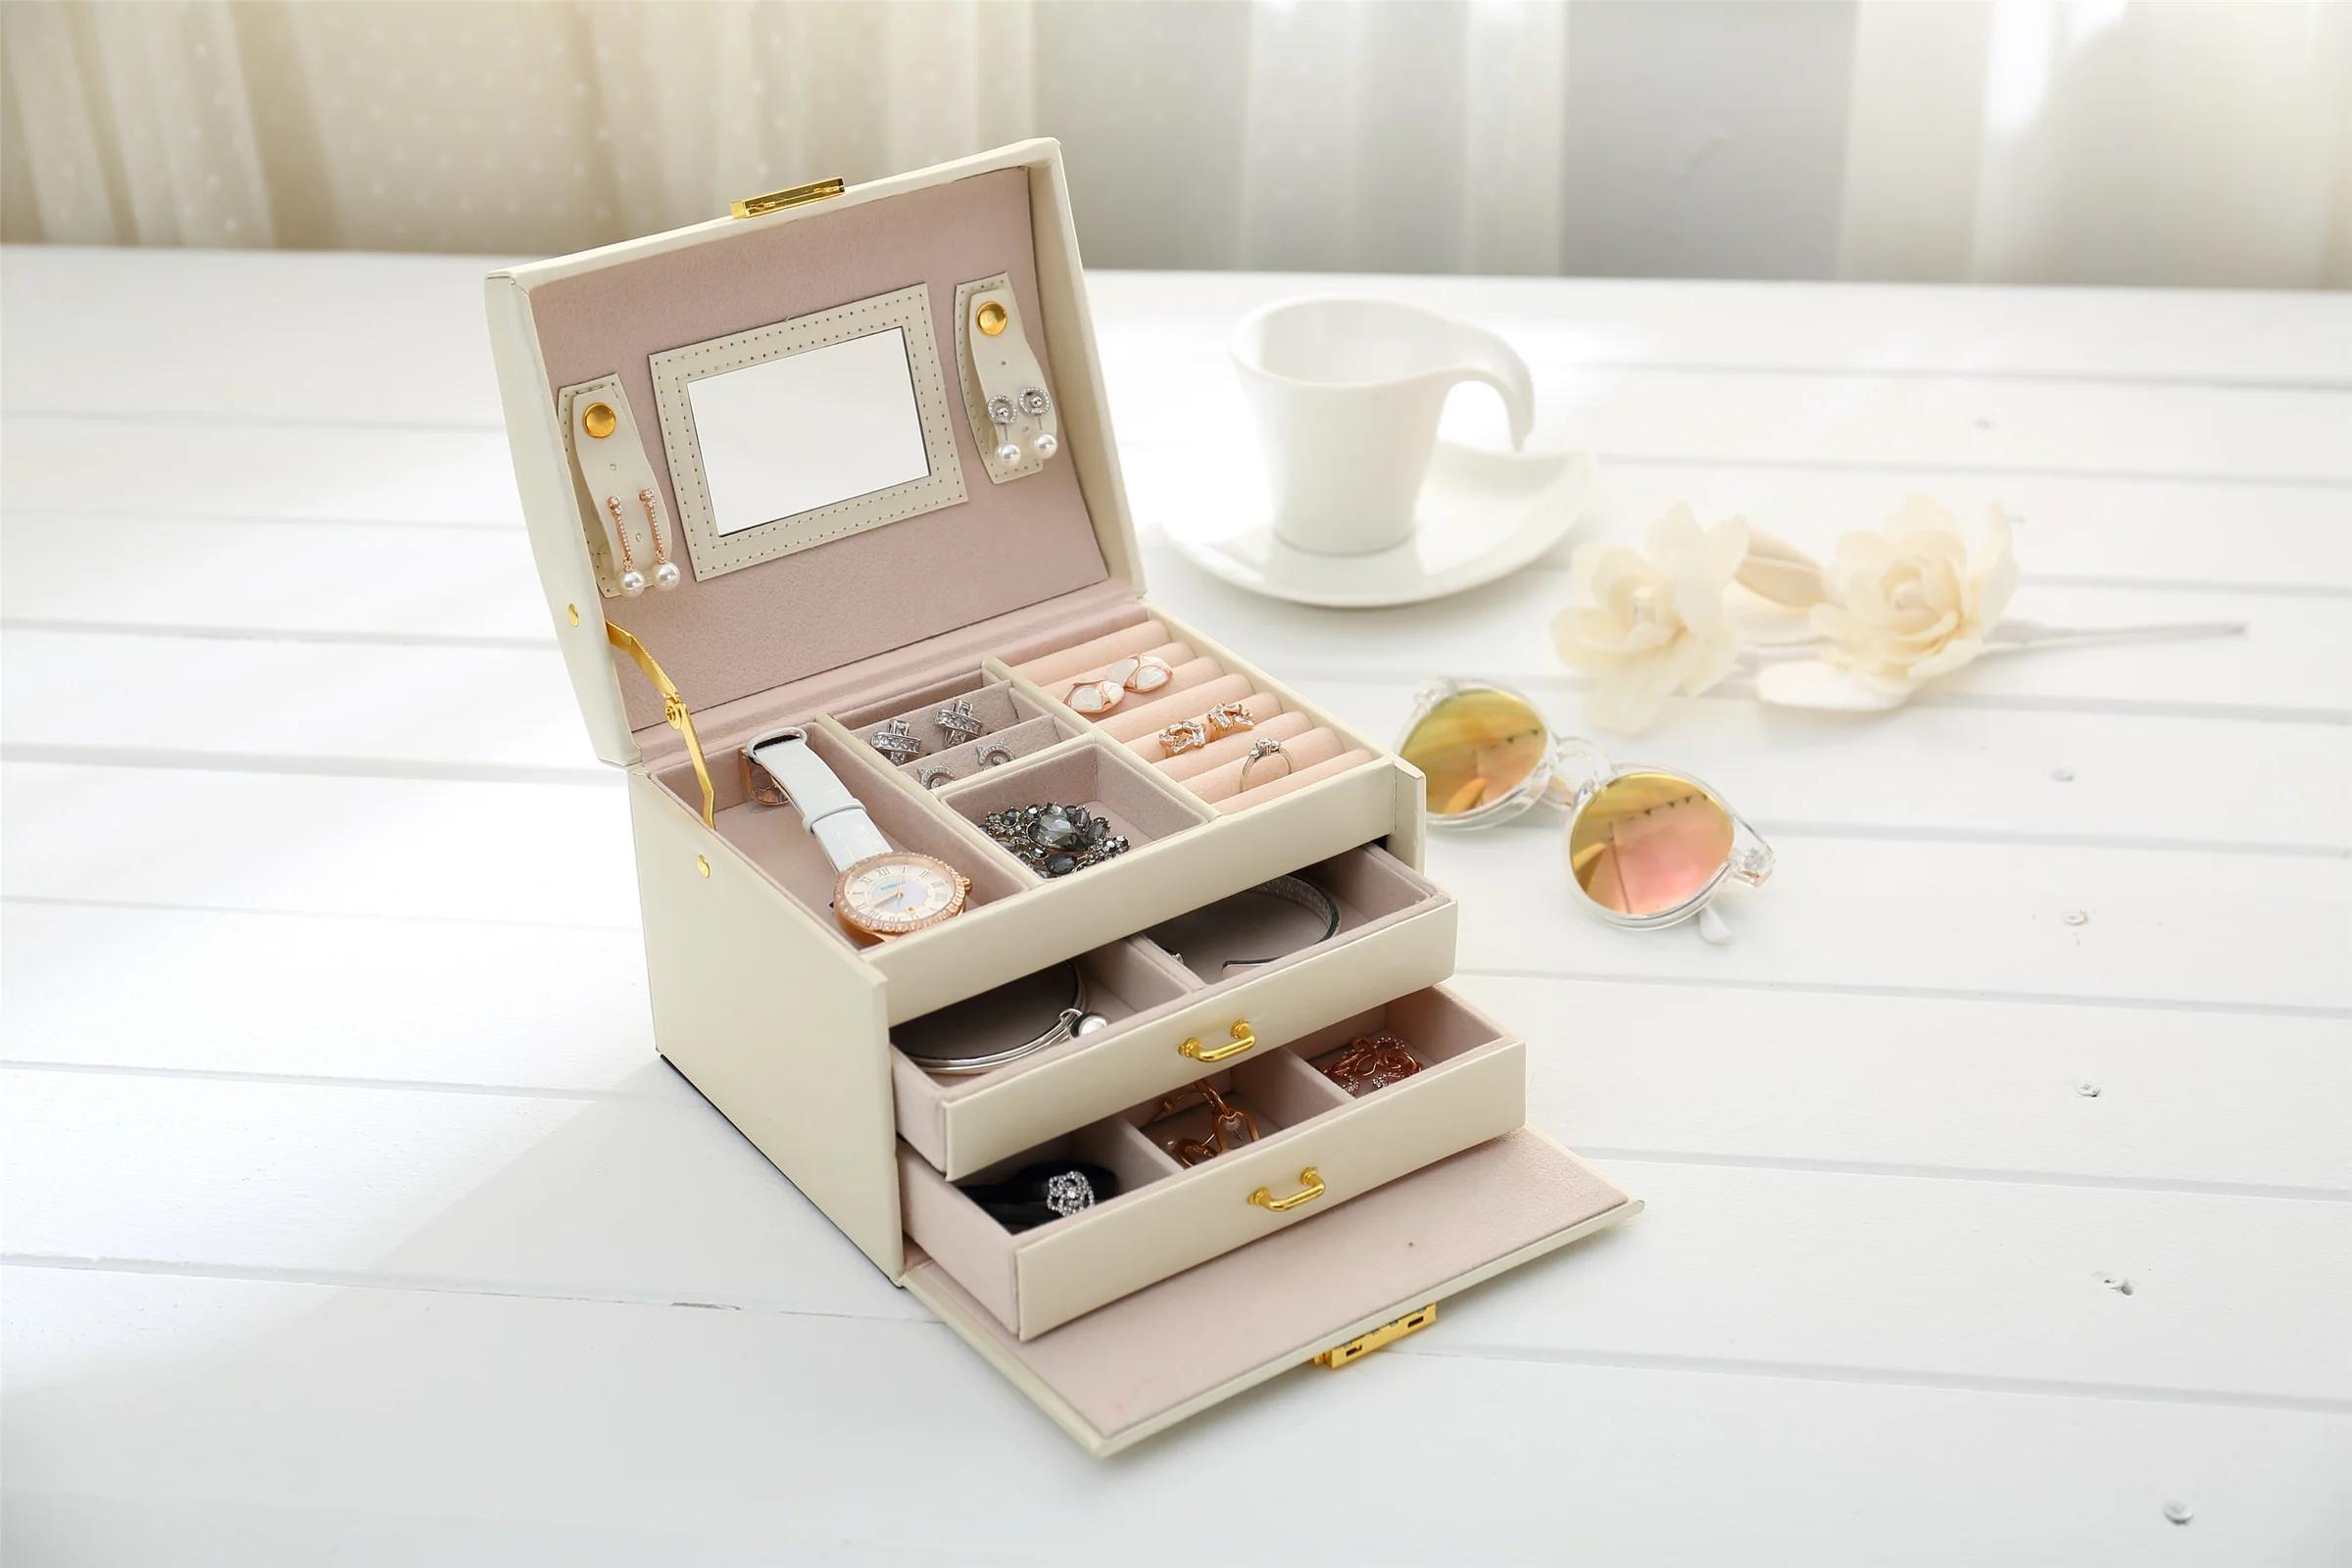 Boxes of Elegance for mum for Christmas